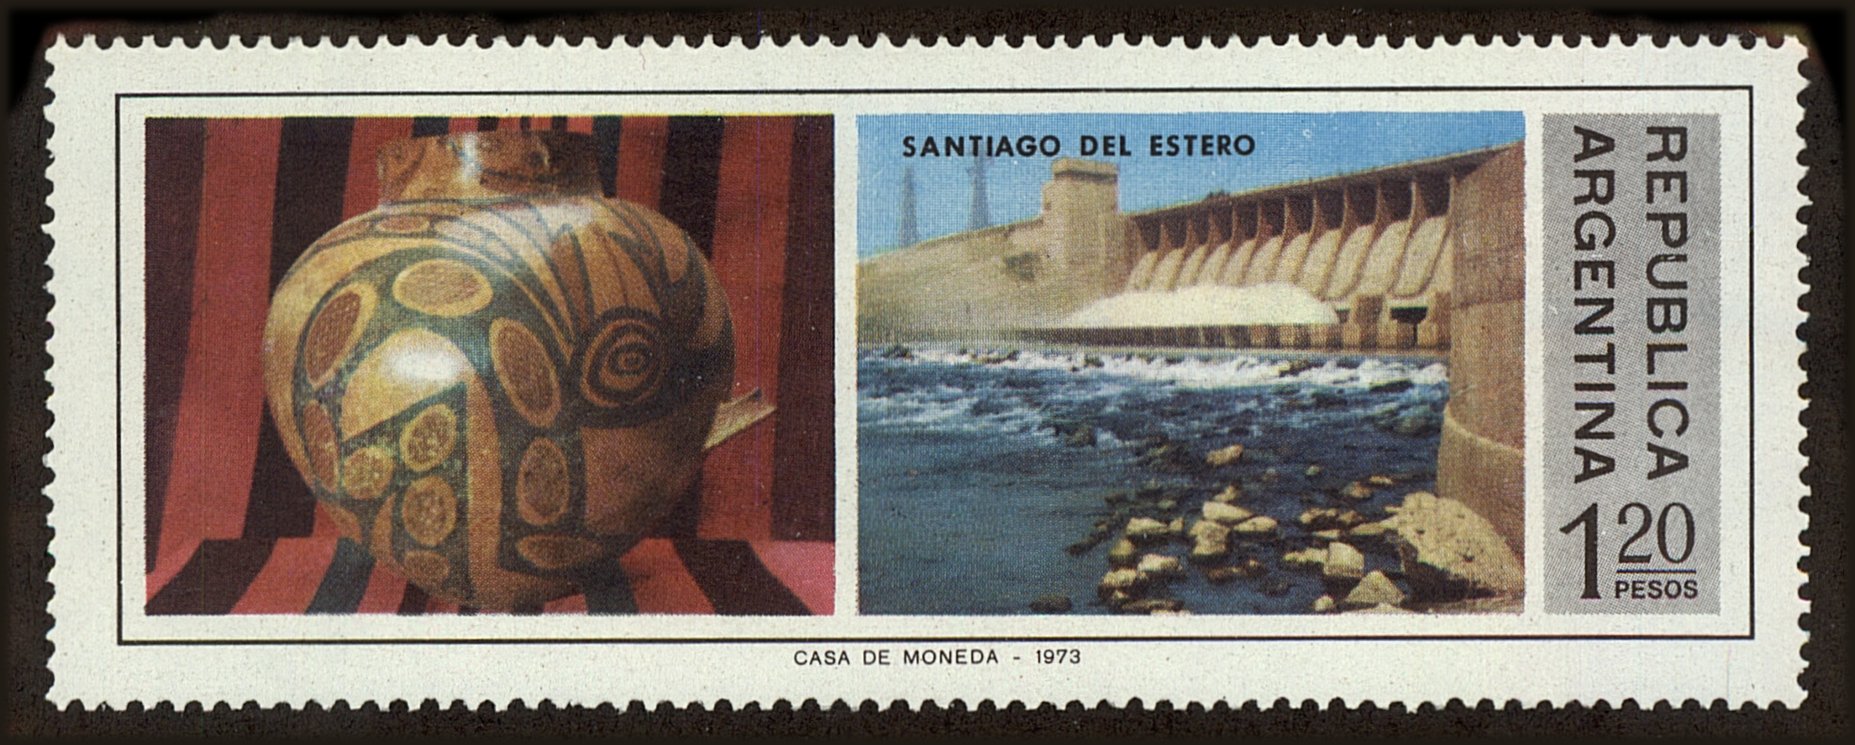 Front view of Argentina 1061 collectors stamp